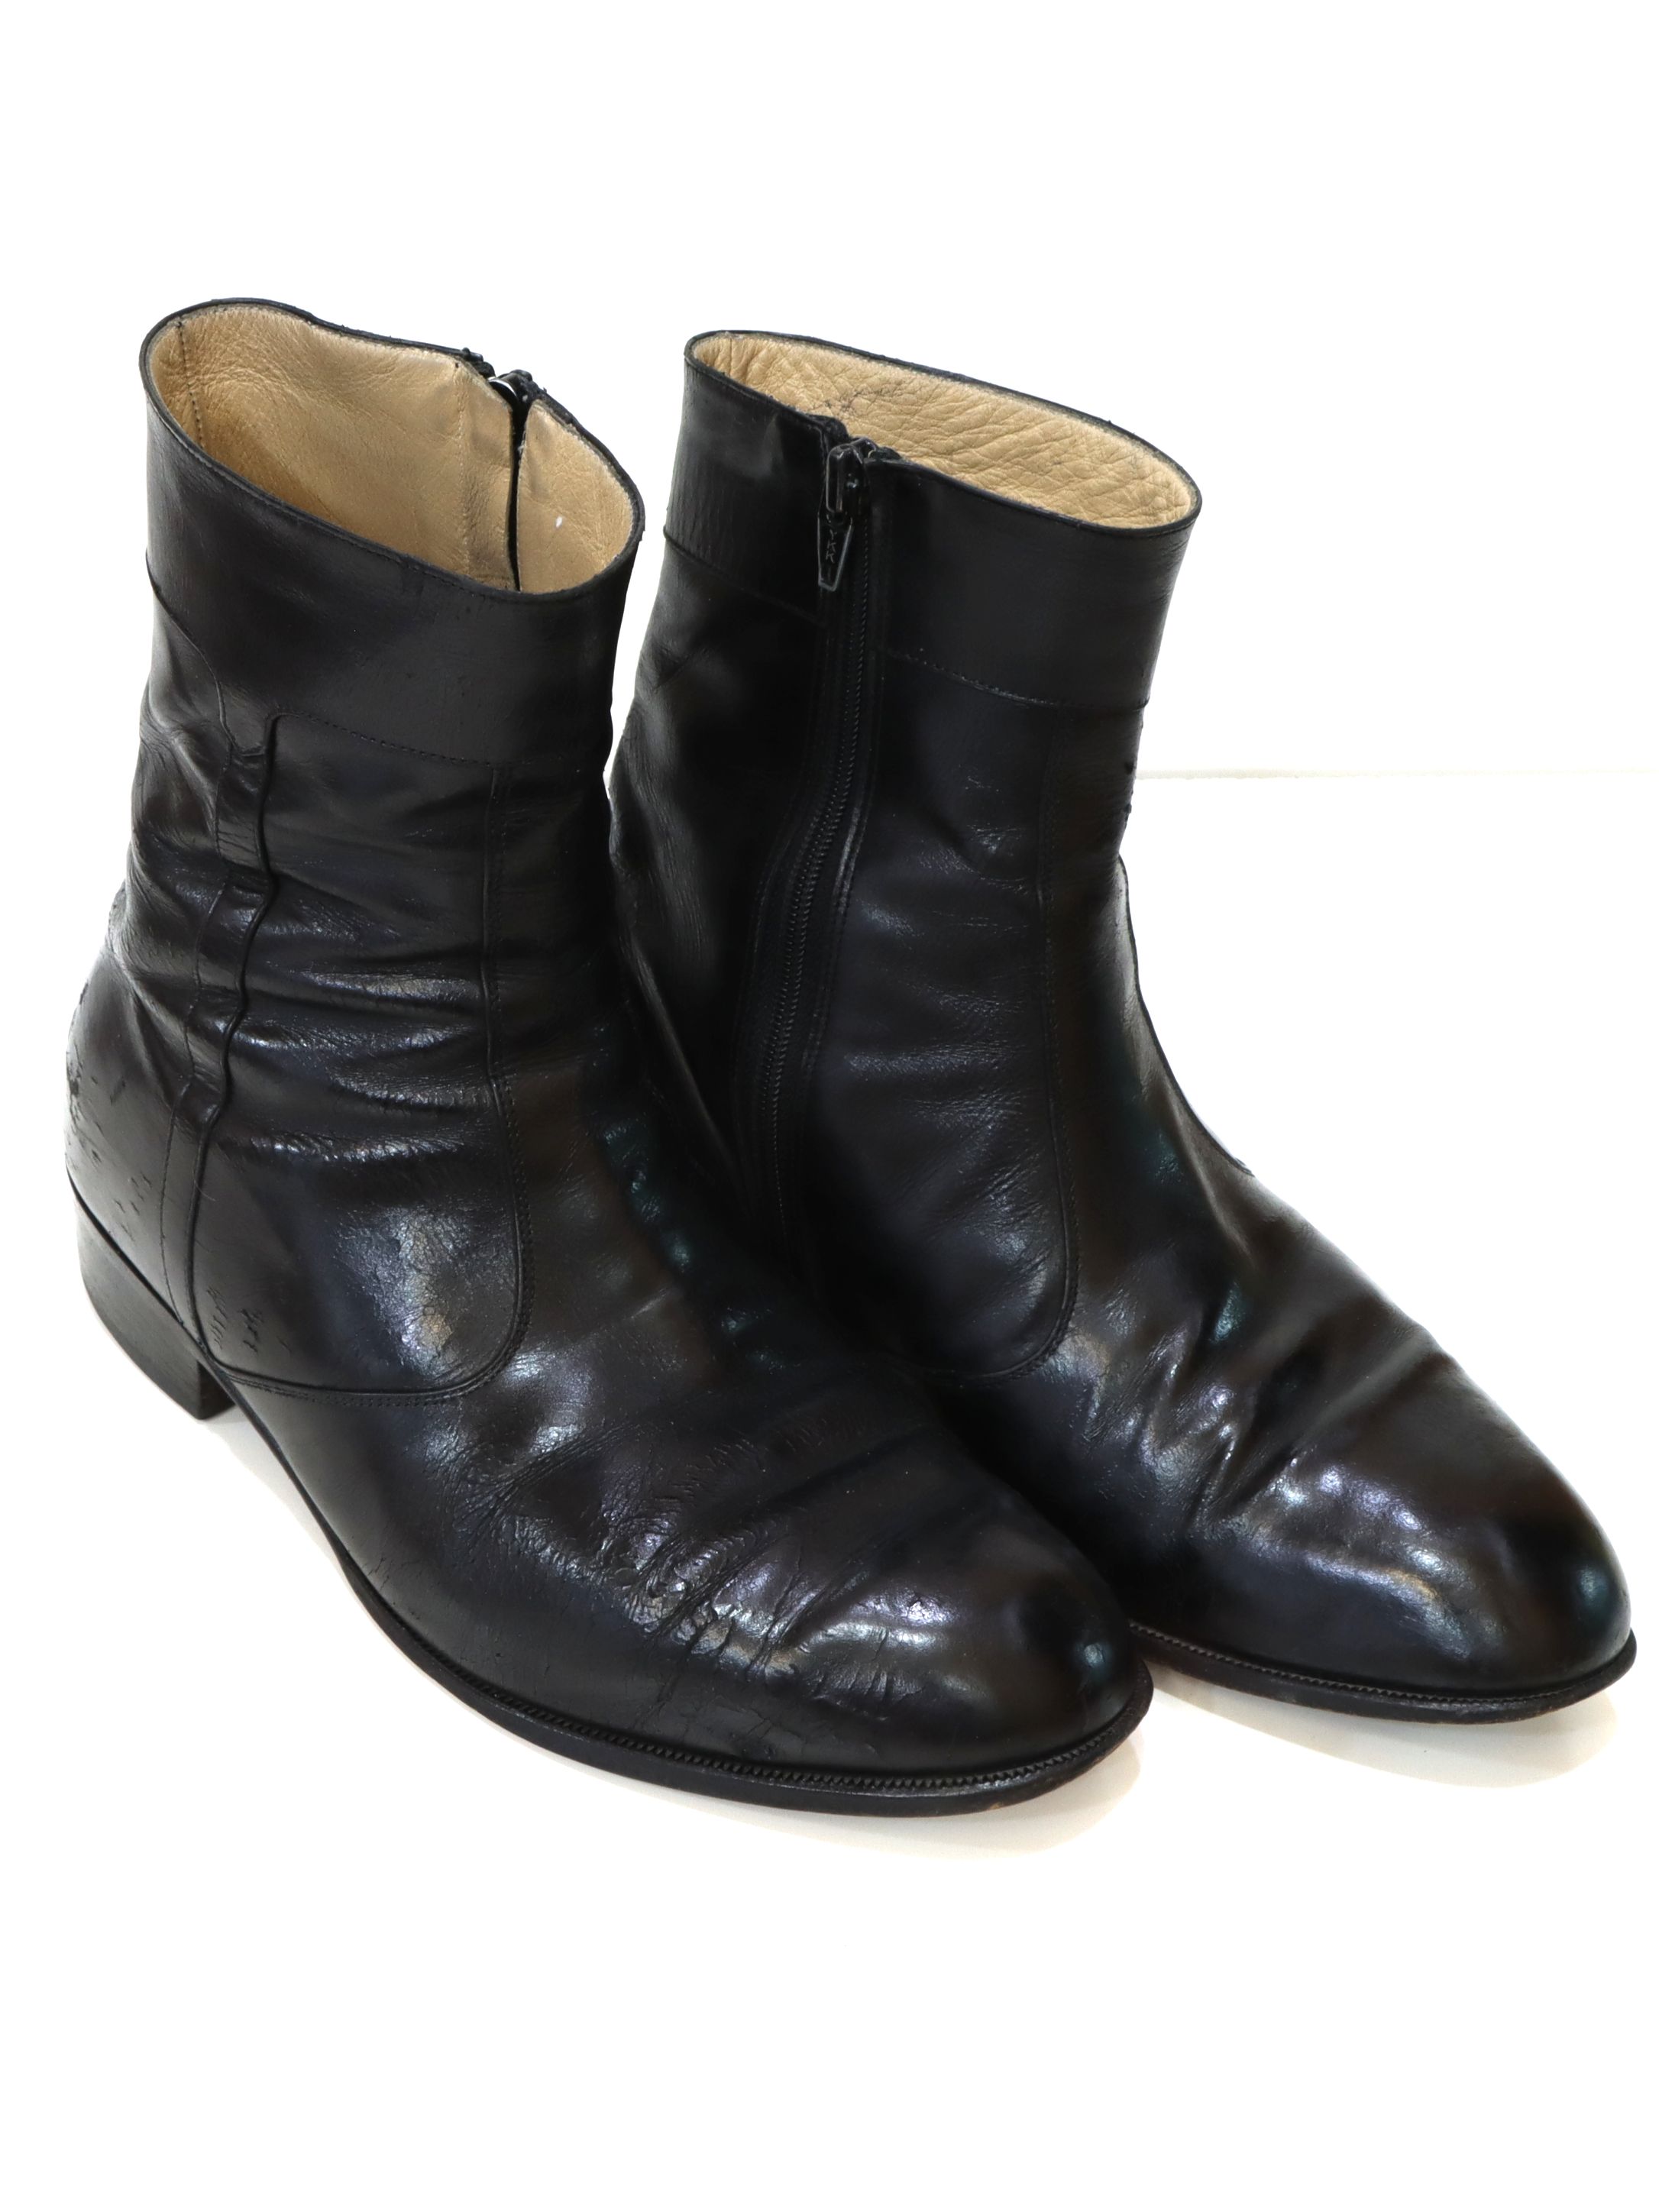 Nineties Di Fabrizio Shoes: 70s style (made in 90s or early y2k) -Di  Fabrizio- Mens black leather black leather Beatle style boots with inside  ankle zip closure, front seamed details. Some minor